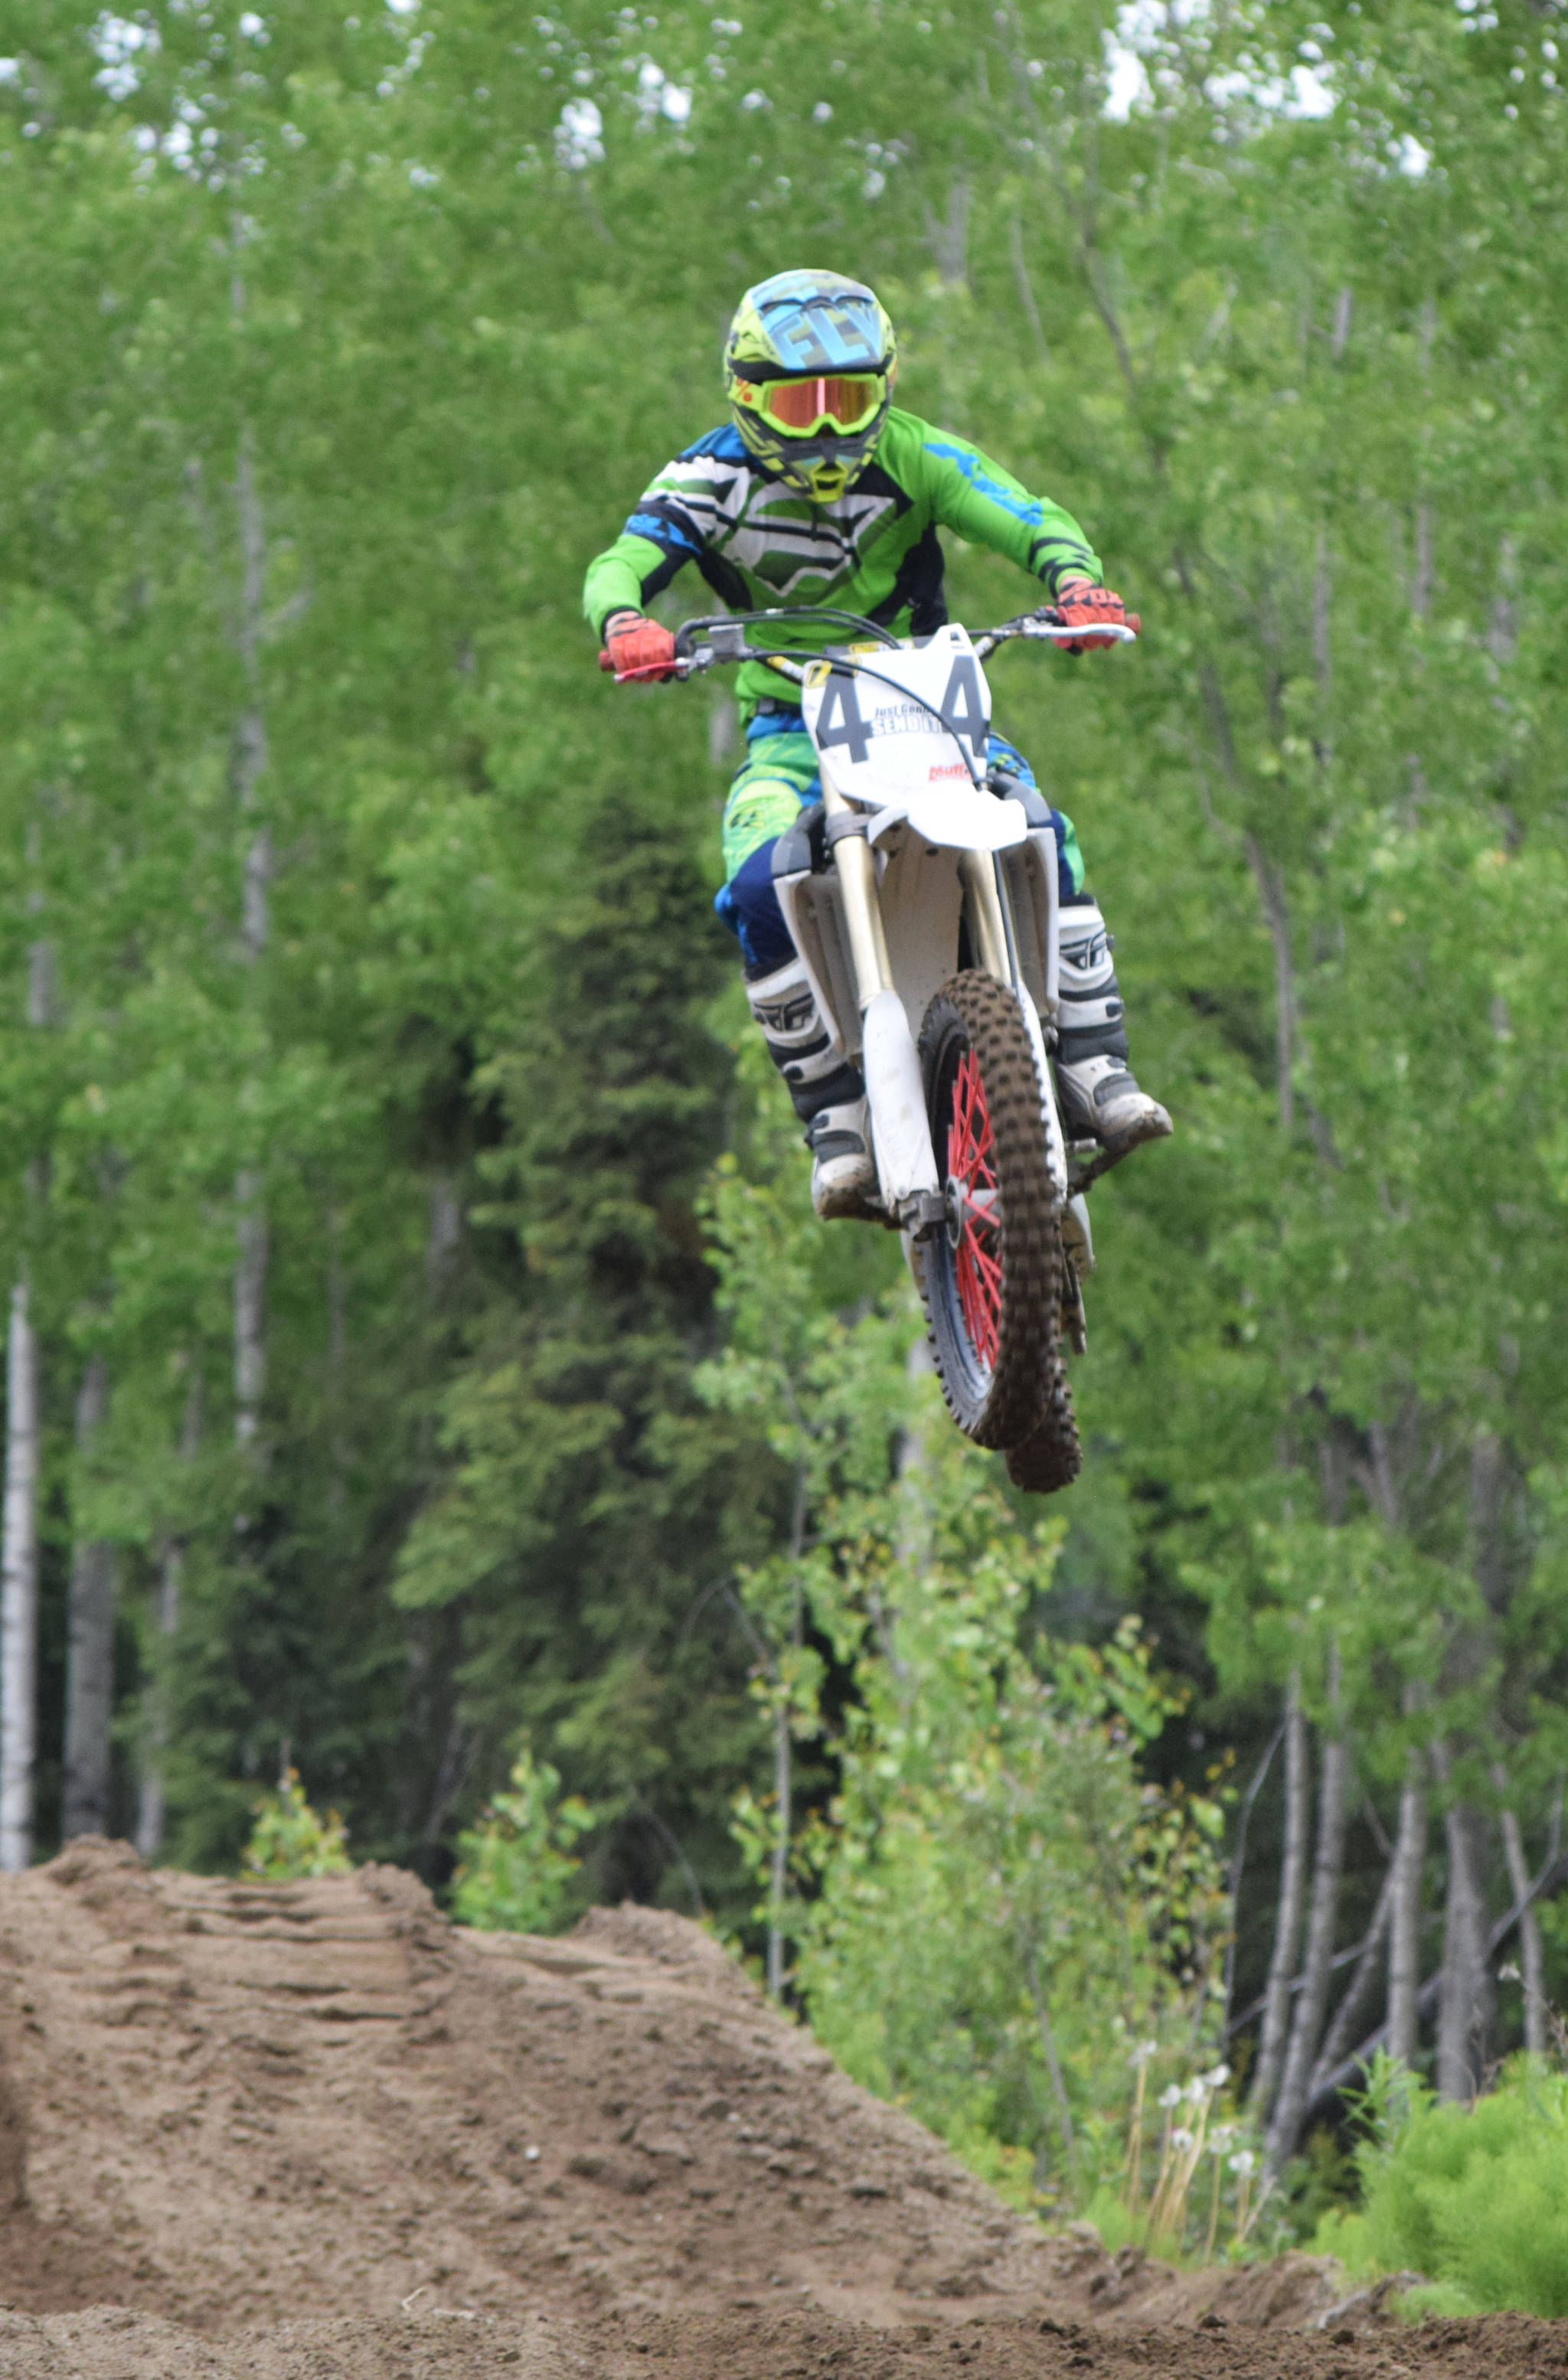 Robby Schachle flies through the air Saturday, June 15, 2019, at the Alaska State Motocross Championships at Twin City Raceway’s motocross track in Kenai, Alaska. (Photo by Joey Klecka/Peninsula Clarion)